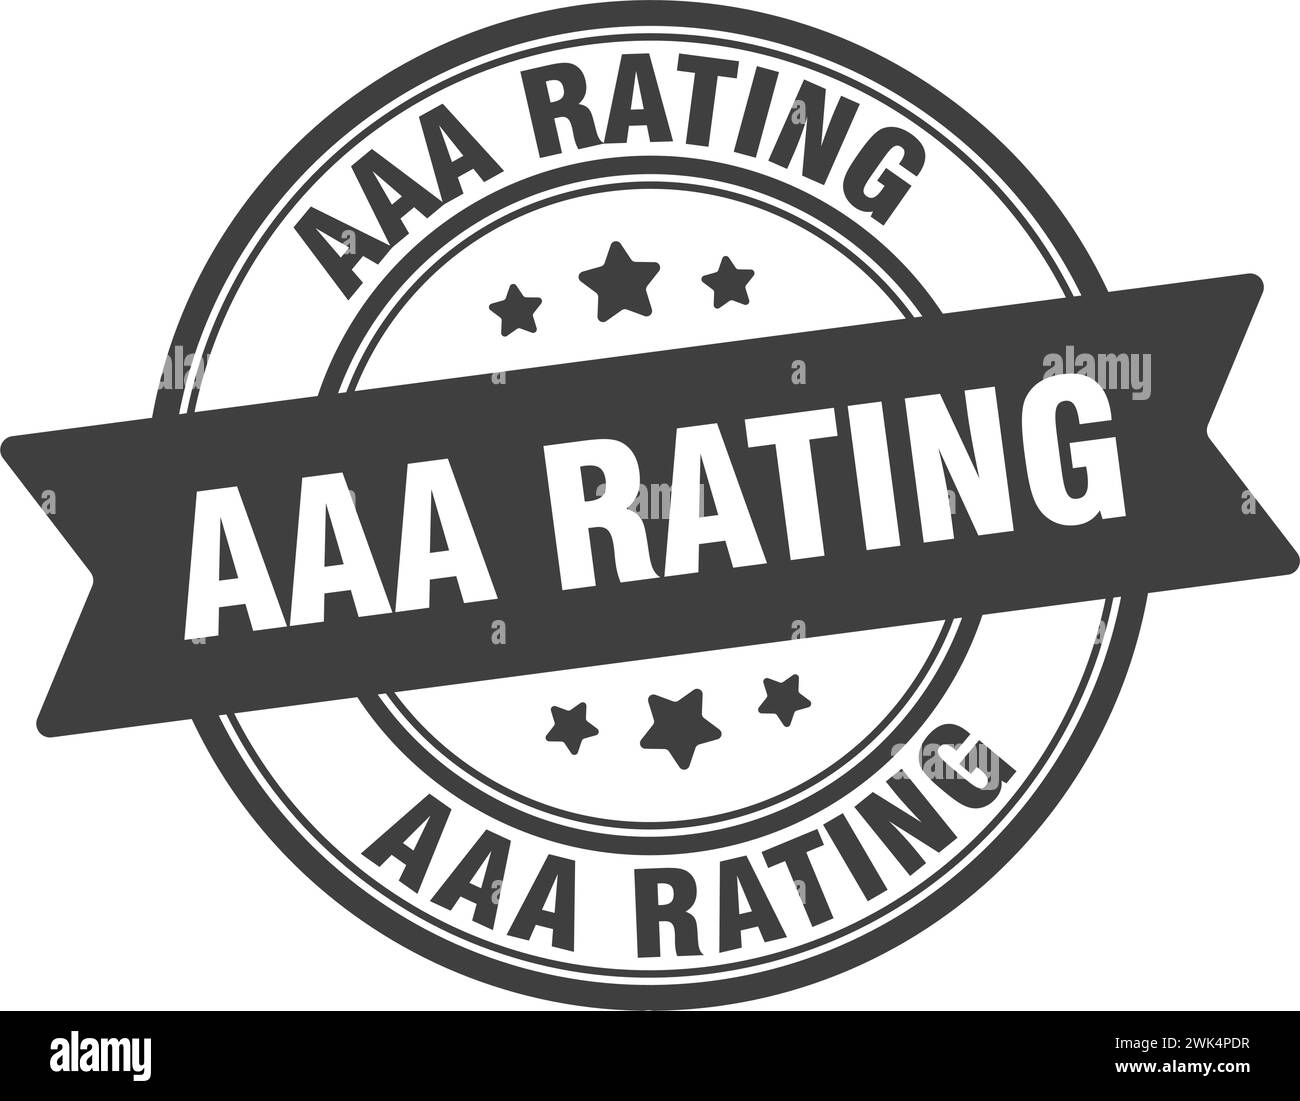 aaa rating stamp. aaa rating round sign. label on transparent background Stock Vector